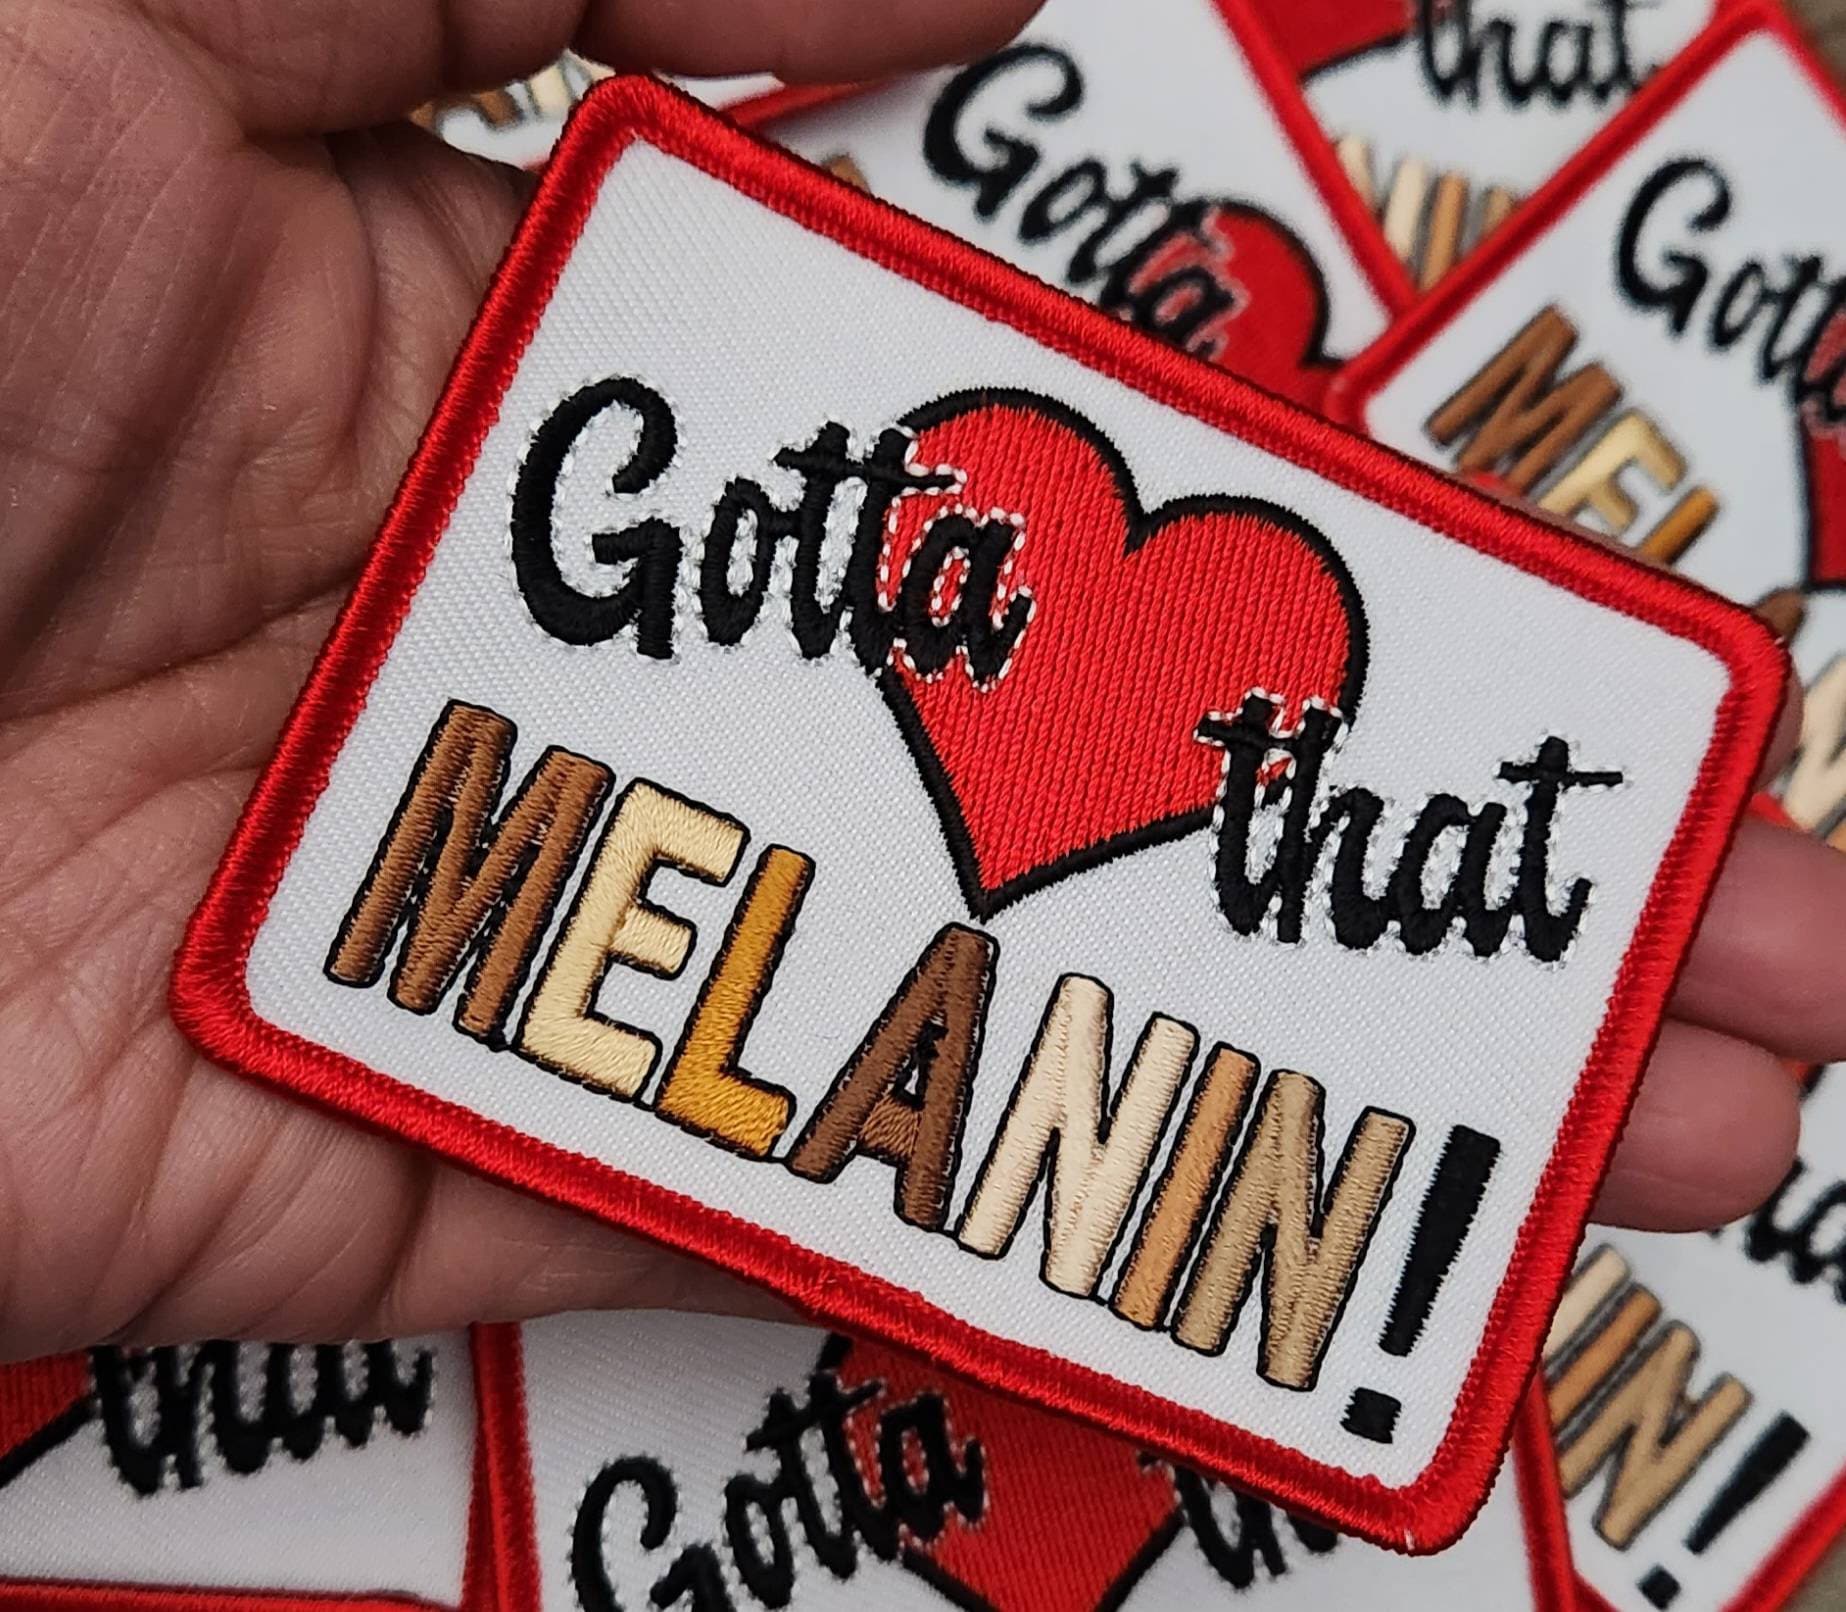 Super Cute, 1-pc,"Gotta Love that Melanin" Popular Patch, Size 3.25"x2.5" Iron-on Patch, Melanin Magic Patch, Patch for Jackets, DIY Project